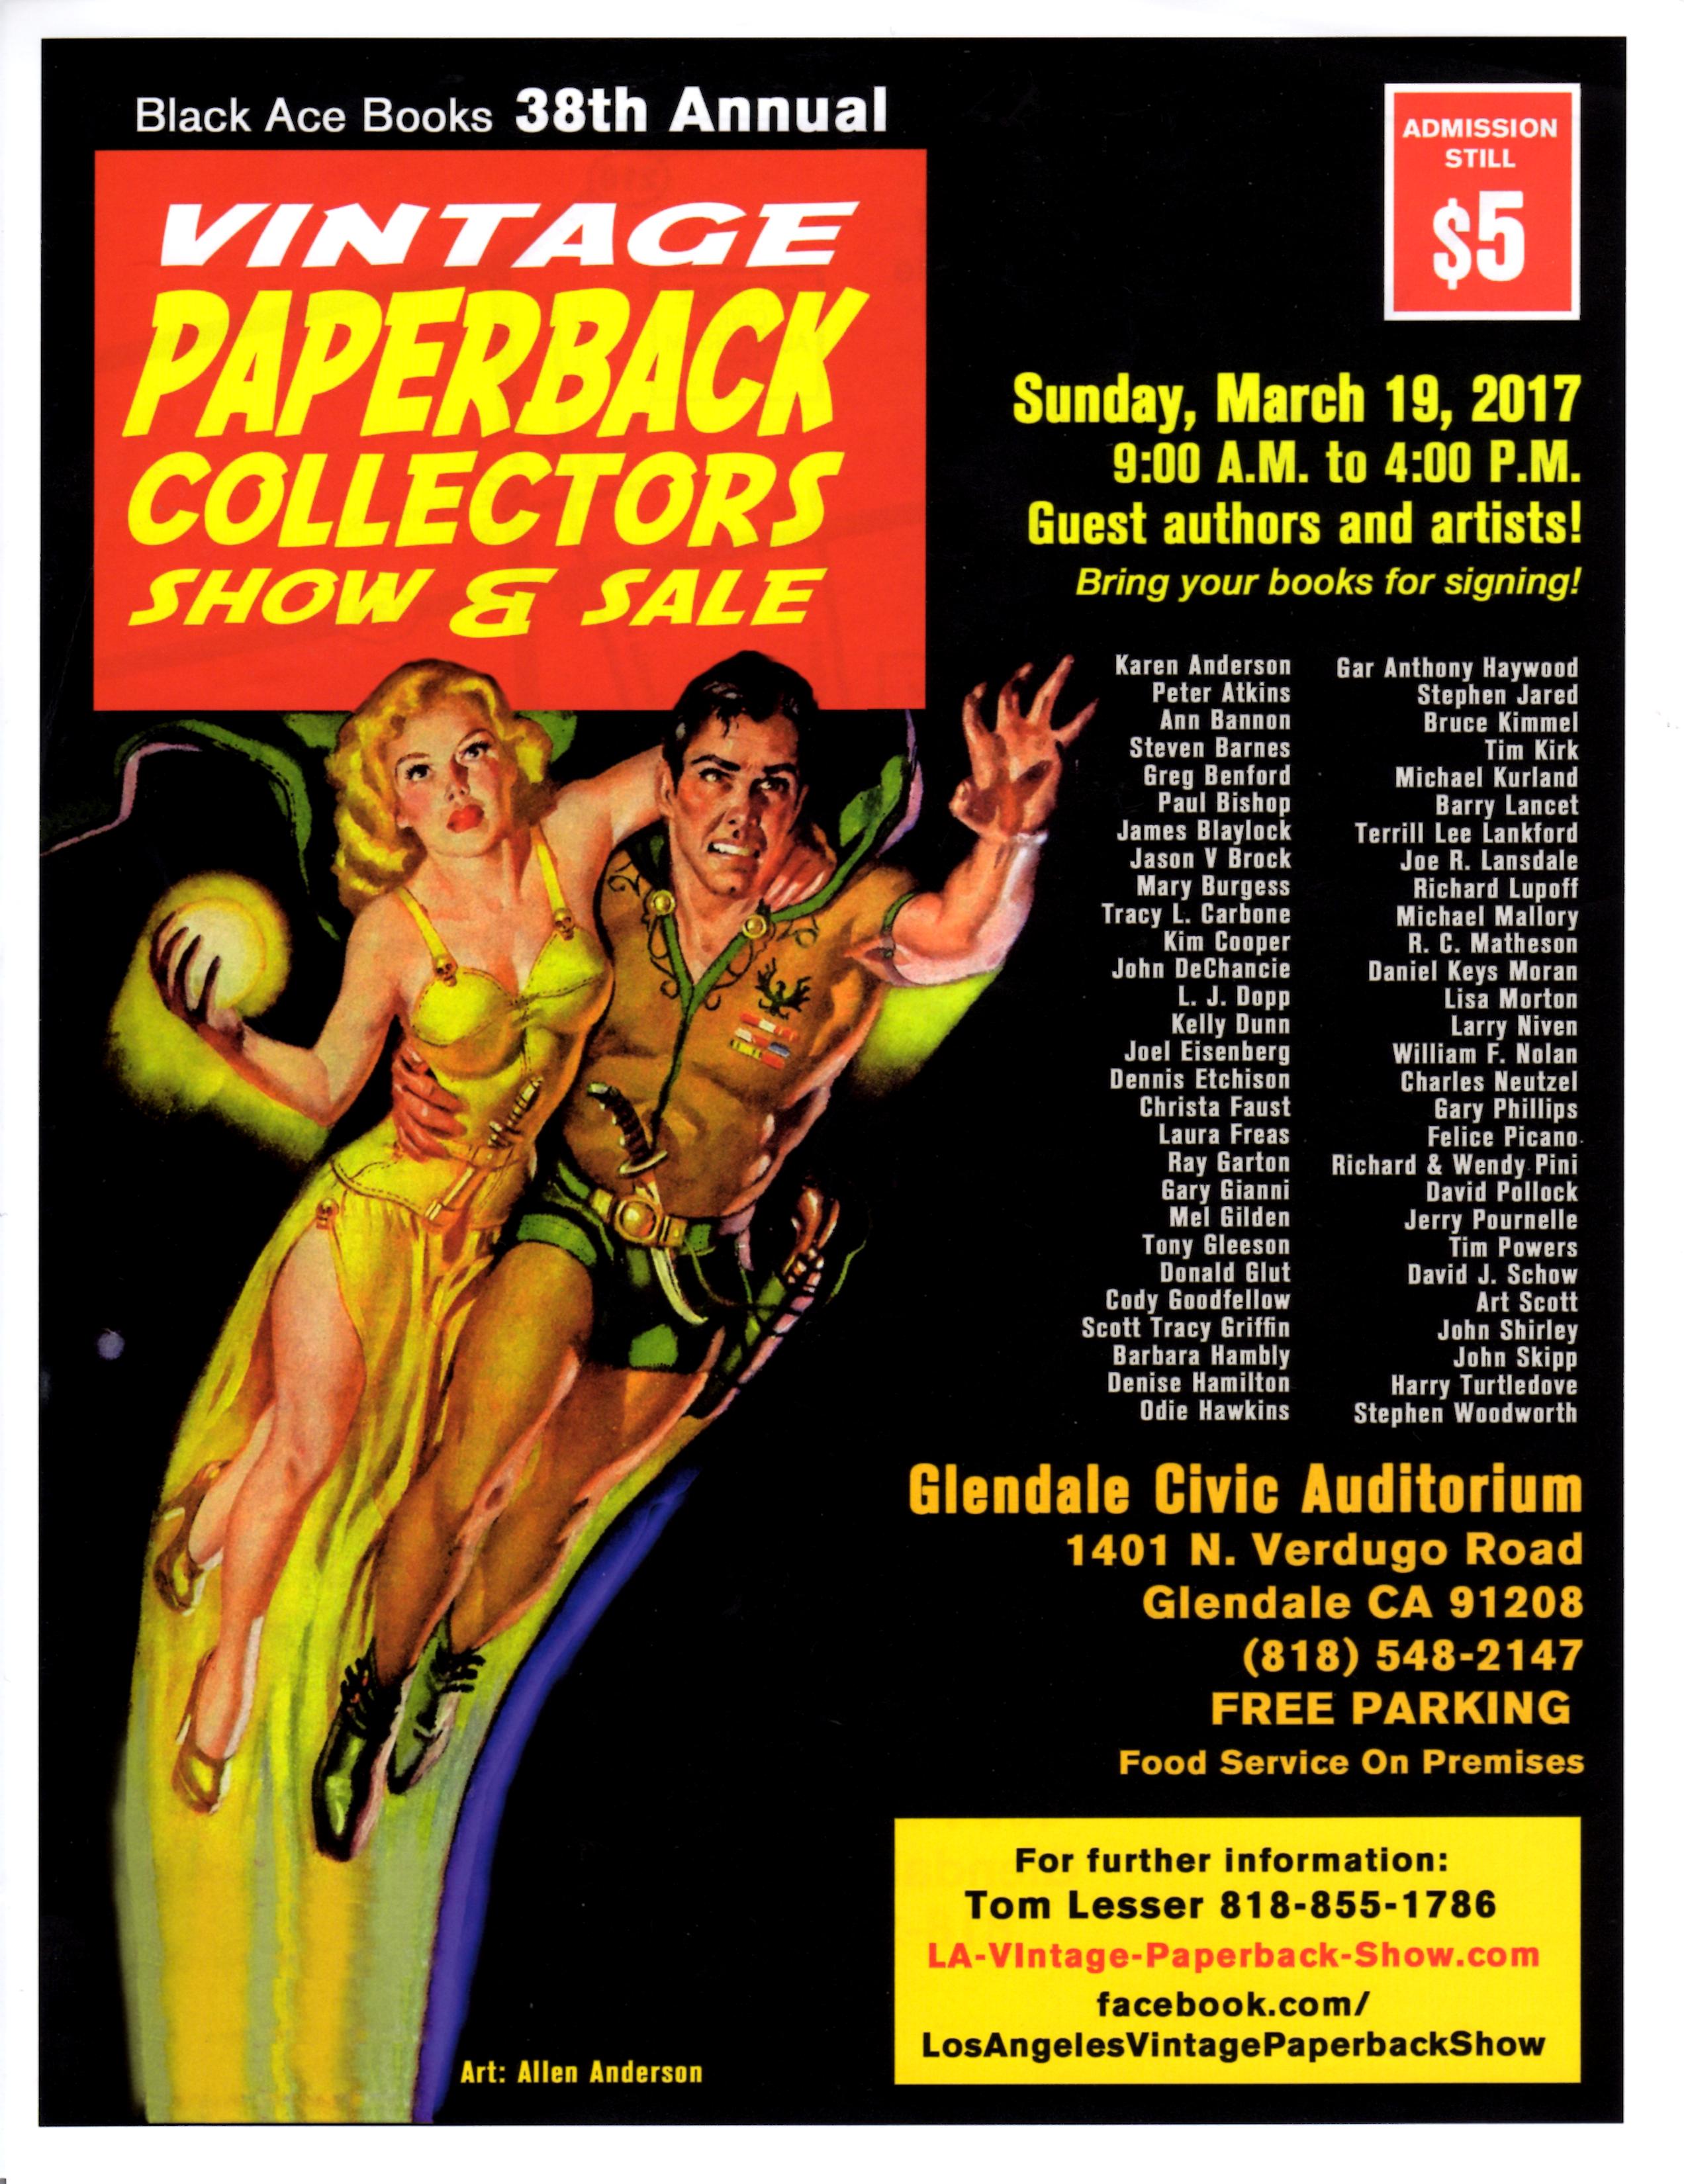 This is the big show of the year for paperback collectors.